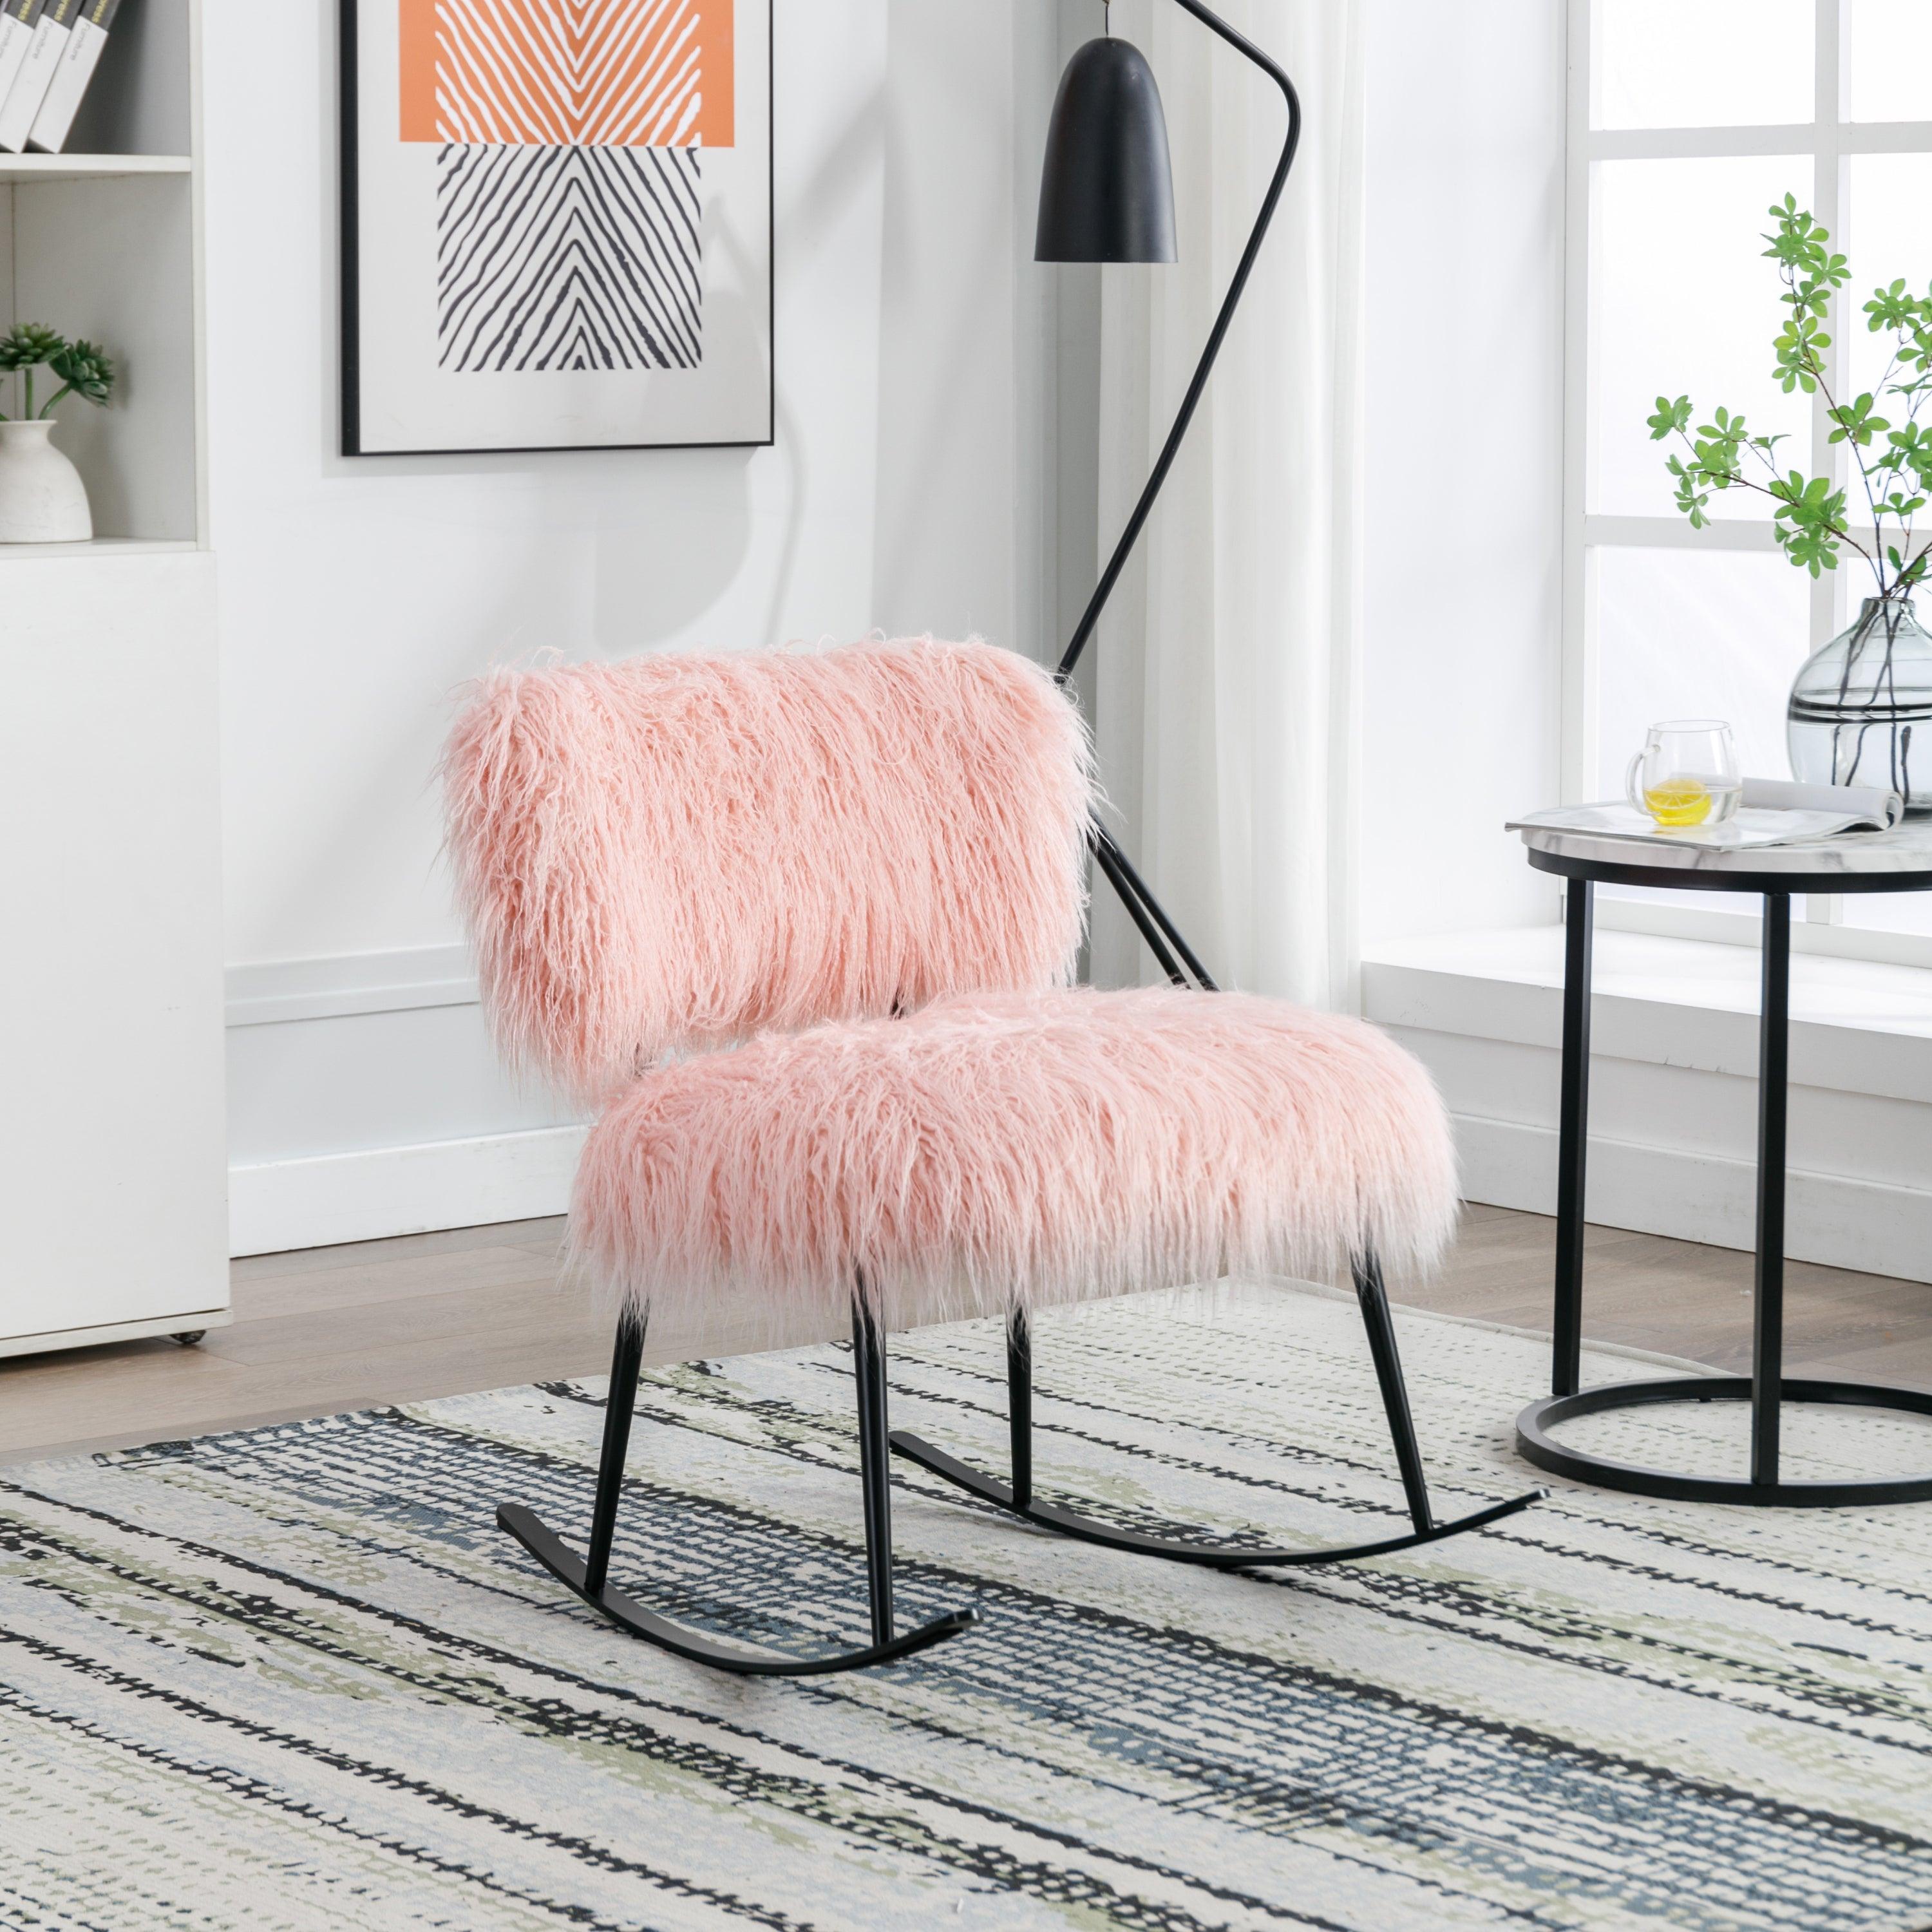 25.2'' Wide Faux Fur Plush Nursery Rocking Chair, Baby Nursing Chair with Metal Rocker, Fluffy Upholstered Glider Chair, Comfy Mid Century Modern Chair for Living Room, Bedroom (Pink) LamCham